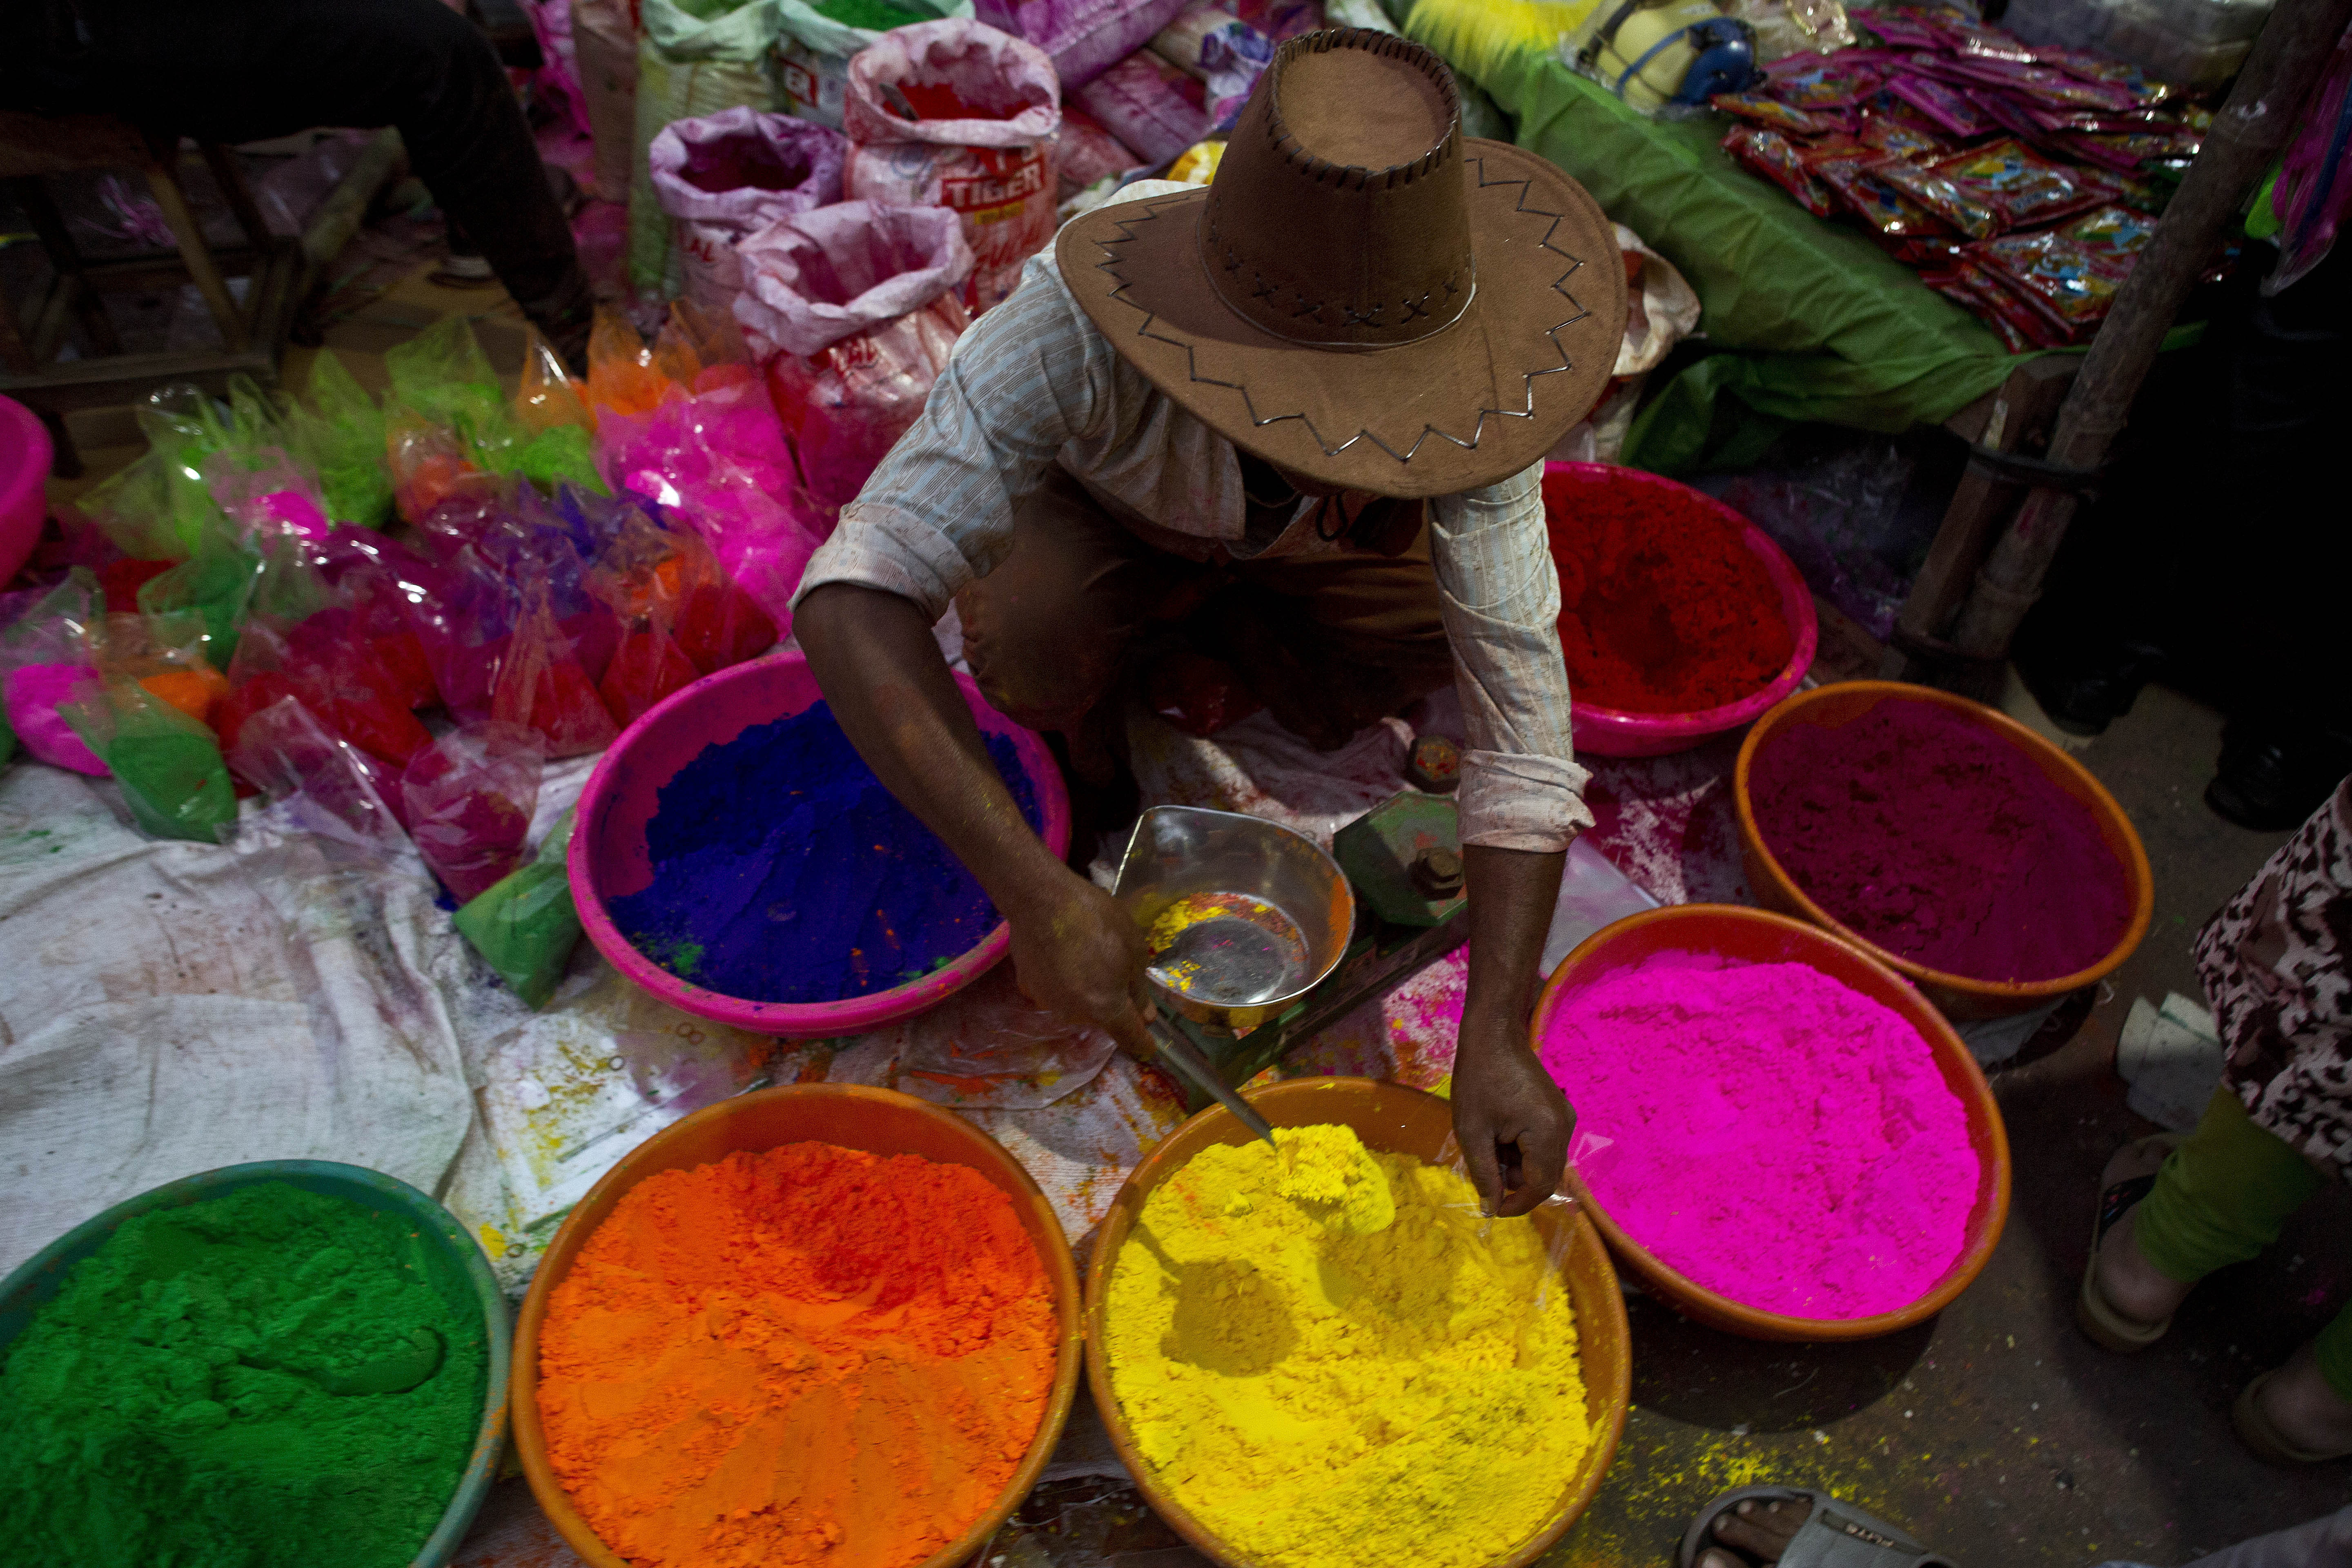 An Indian street vendor sells colored powder a day ahead of Holi, the festival of colors, in Gauhati, India, Wednesday, March 20, 2019. Holi also marks the advent of Spring season. (AP Photo/Anupam Nath)